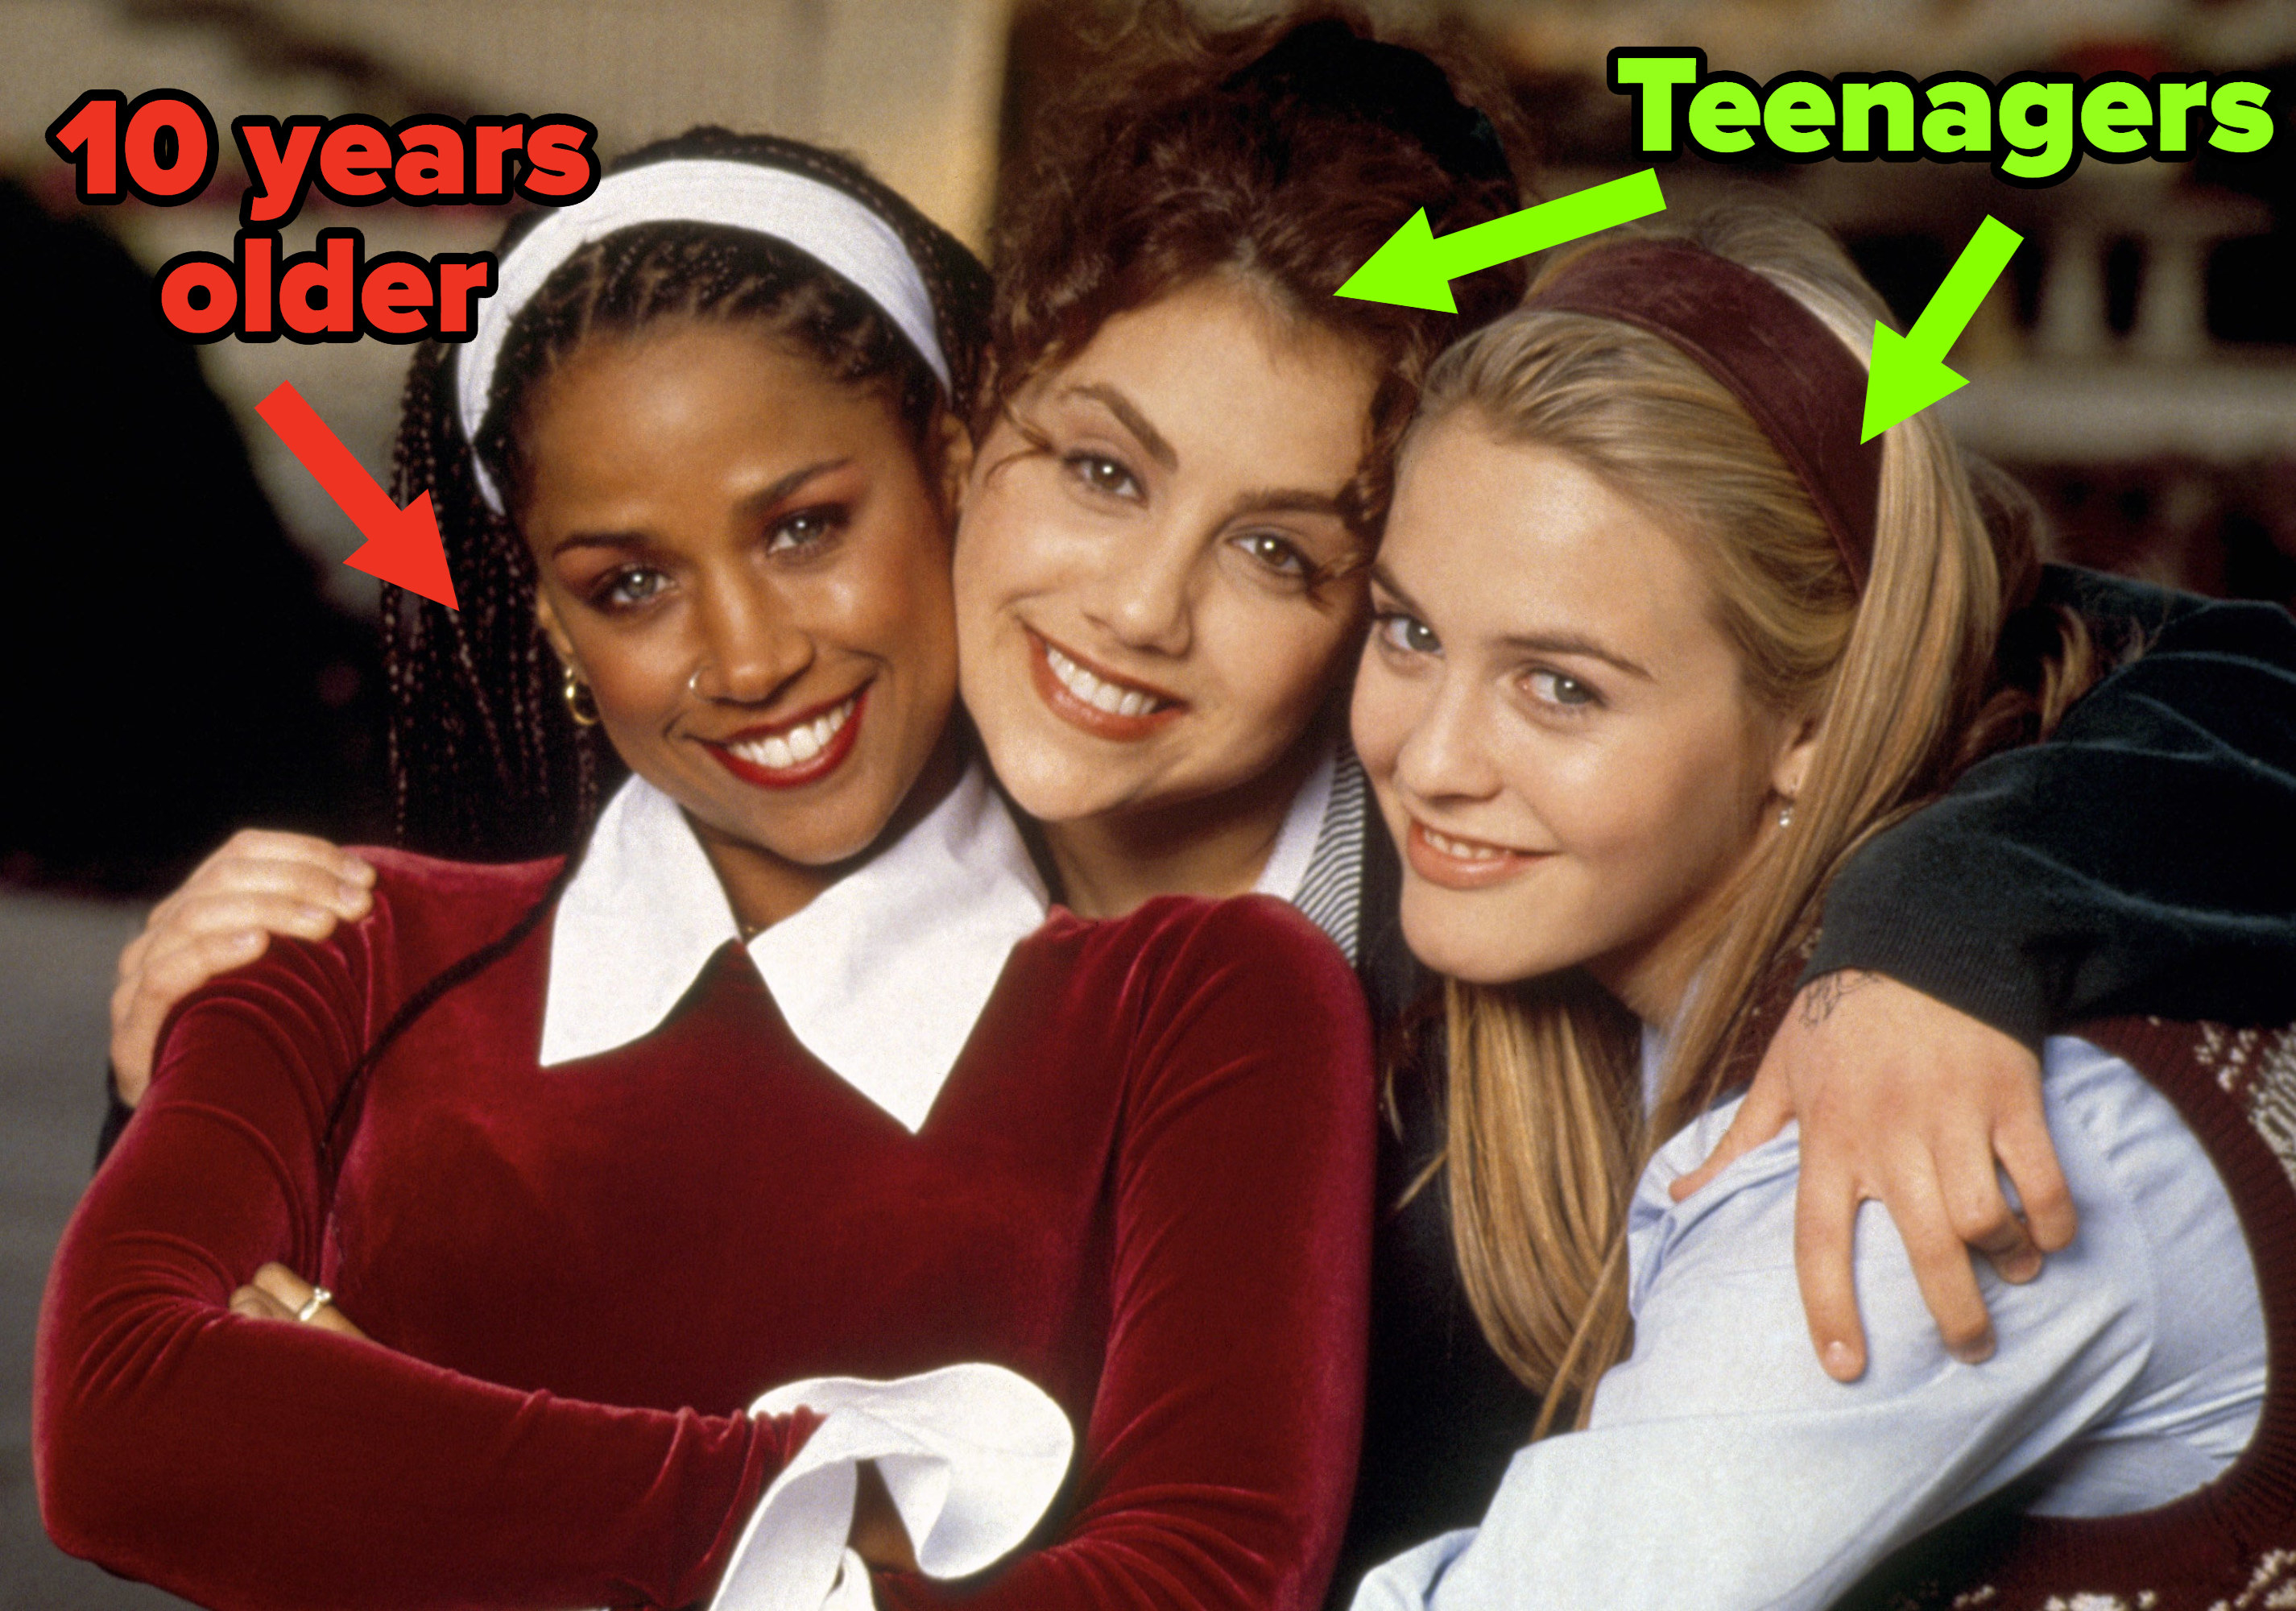 Stacey Dash labeled &quot;10 years older&quot; and Brittany and Alicia labeled &quot;teenagers&quot;